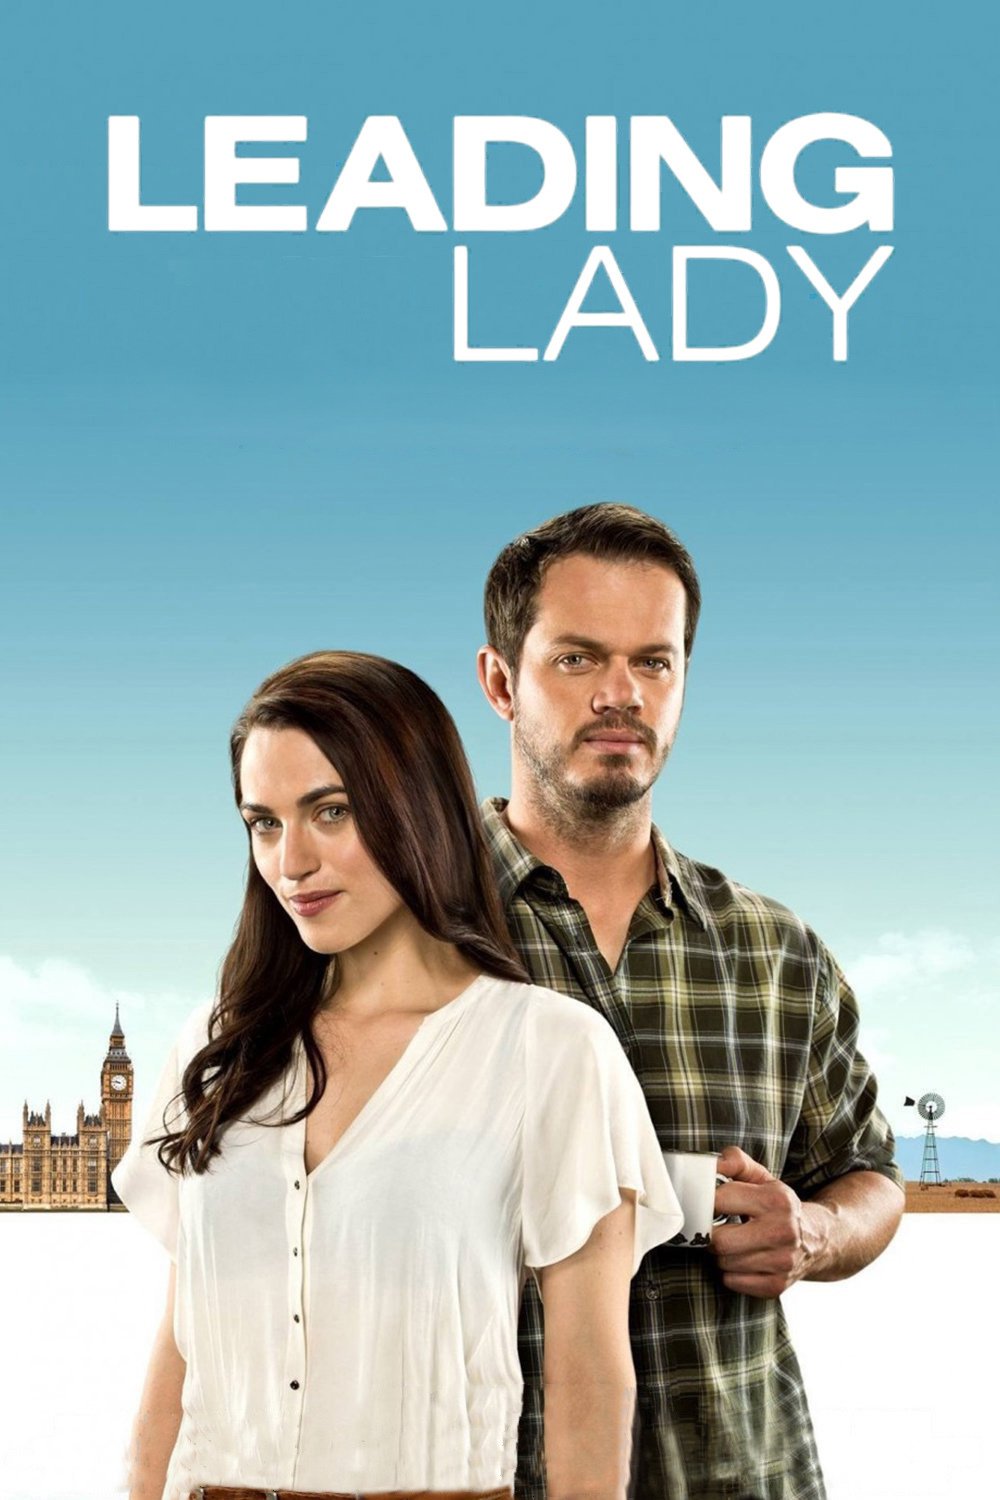 Poster for the movie "Leading Lady"